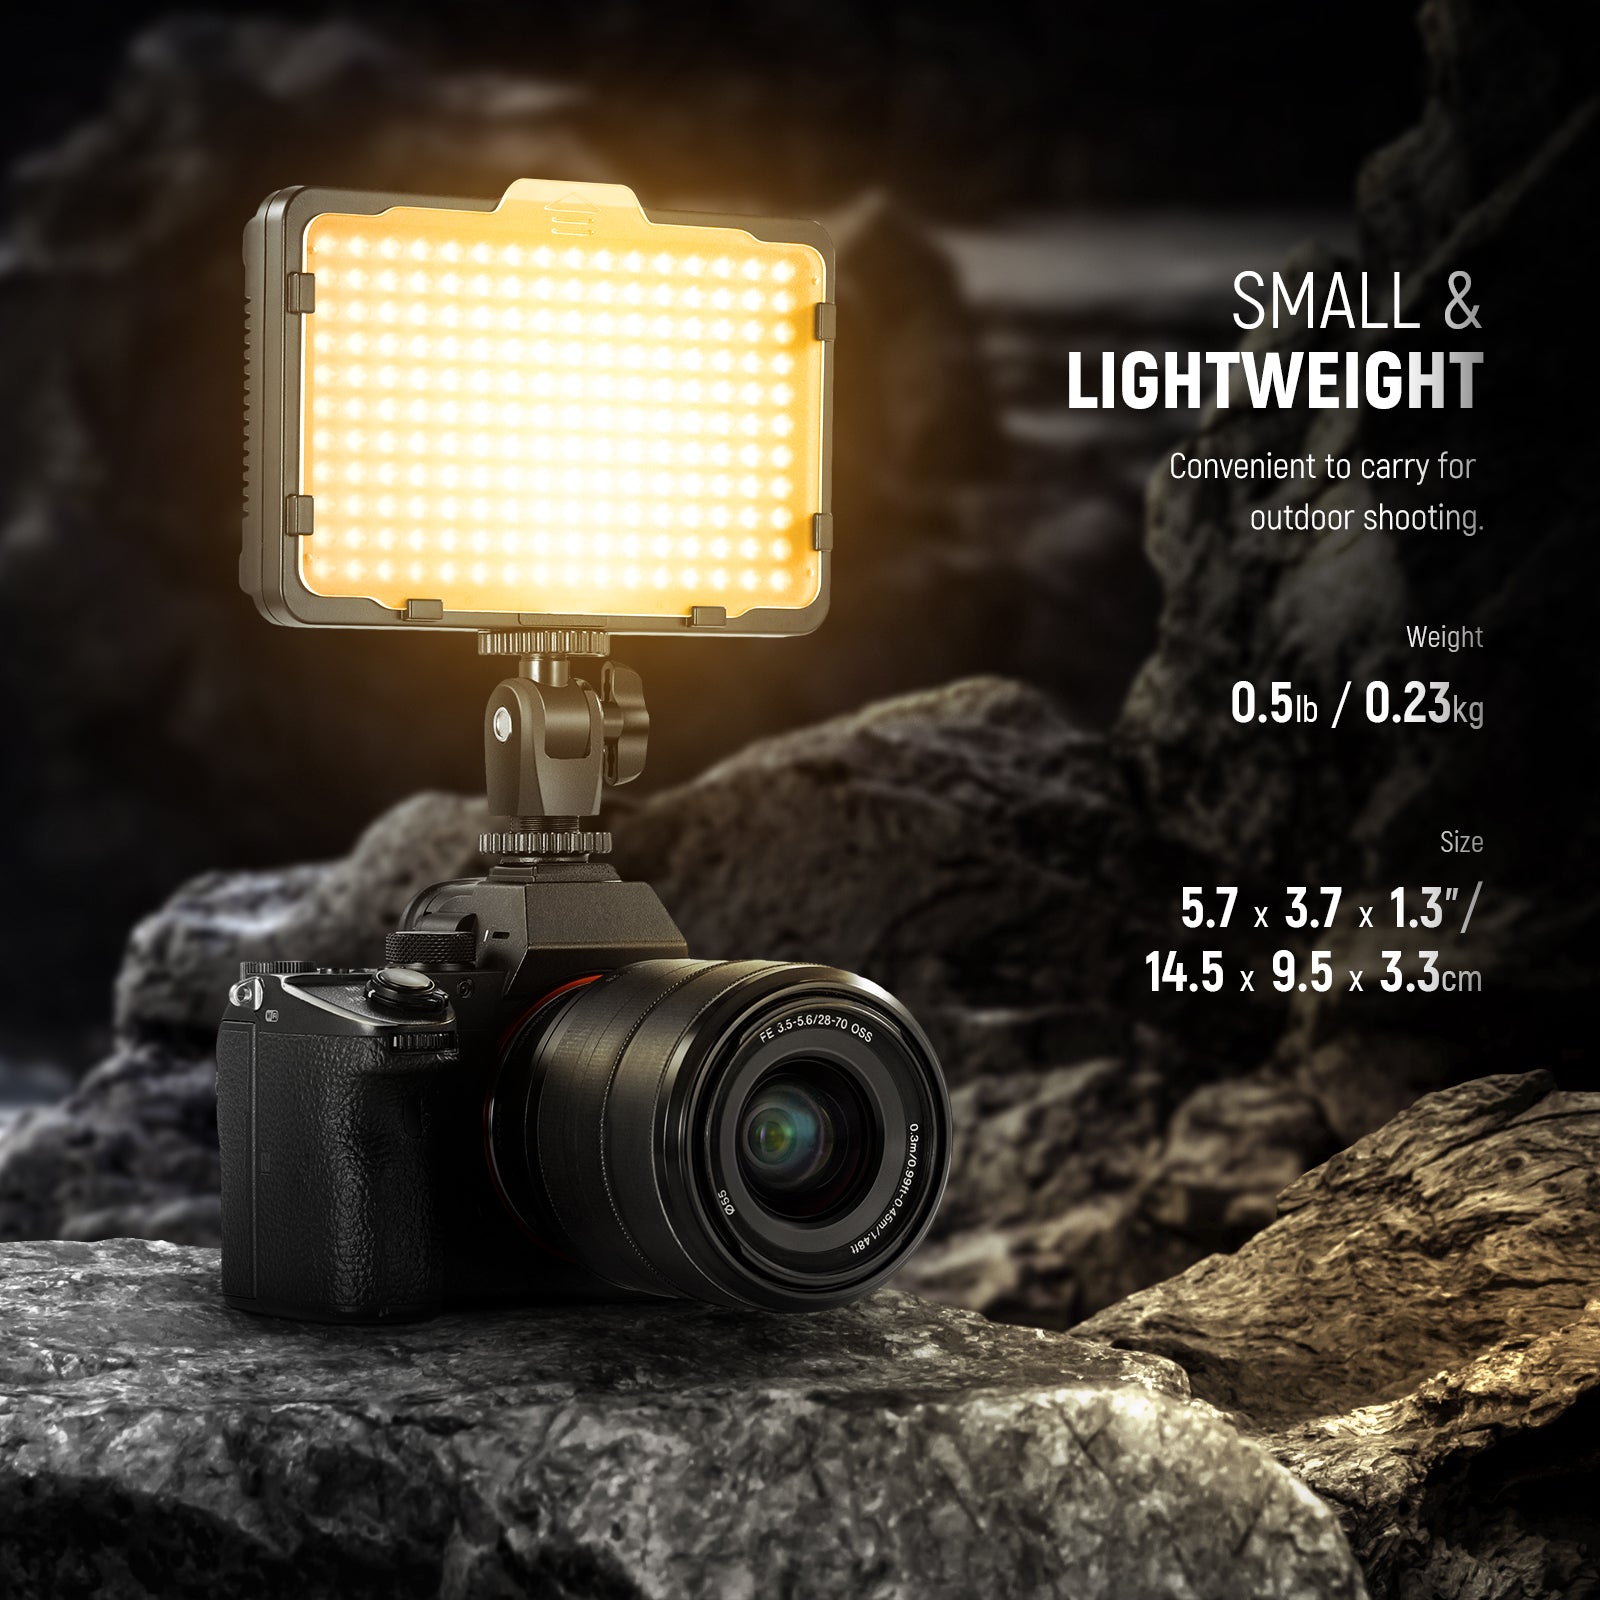 NEEWER Official Photography Equiptment Store - LED Panel Light -NEEWER